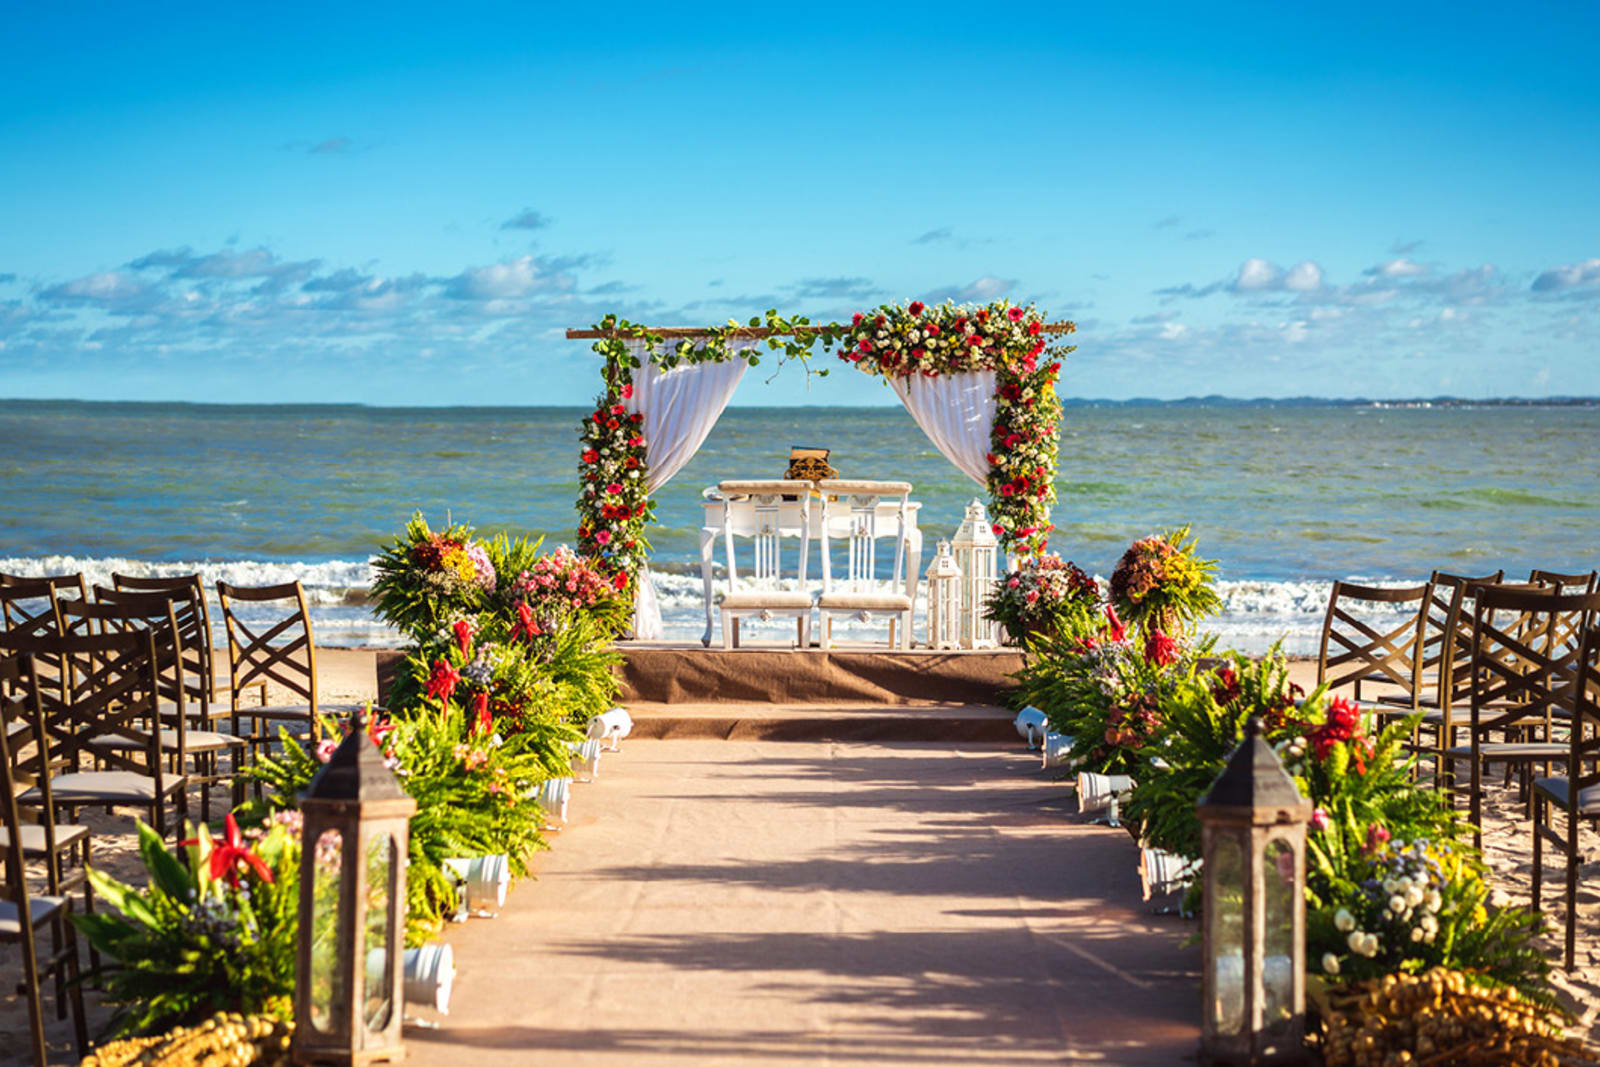 An altar, chairs, flowers and other destination wedding decor set up on the beach